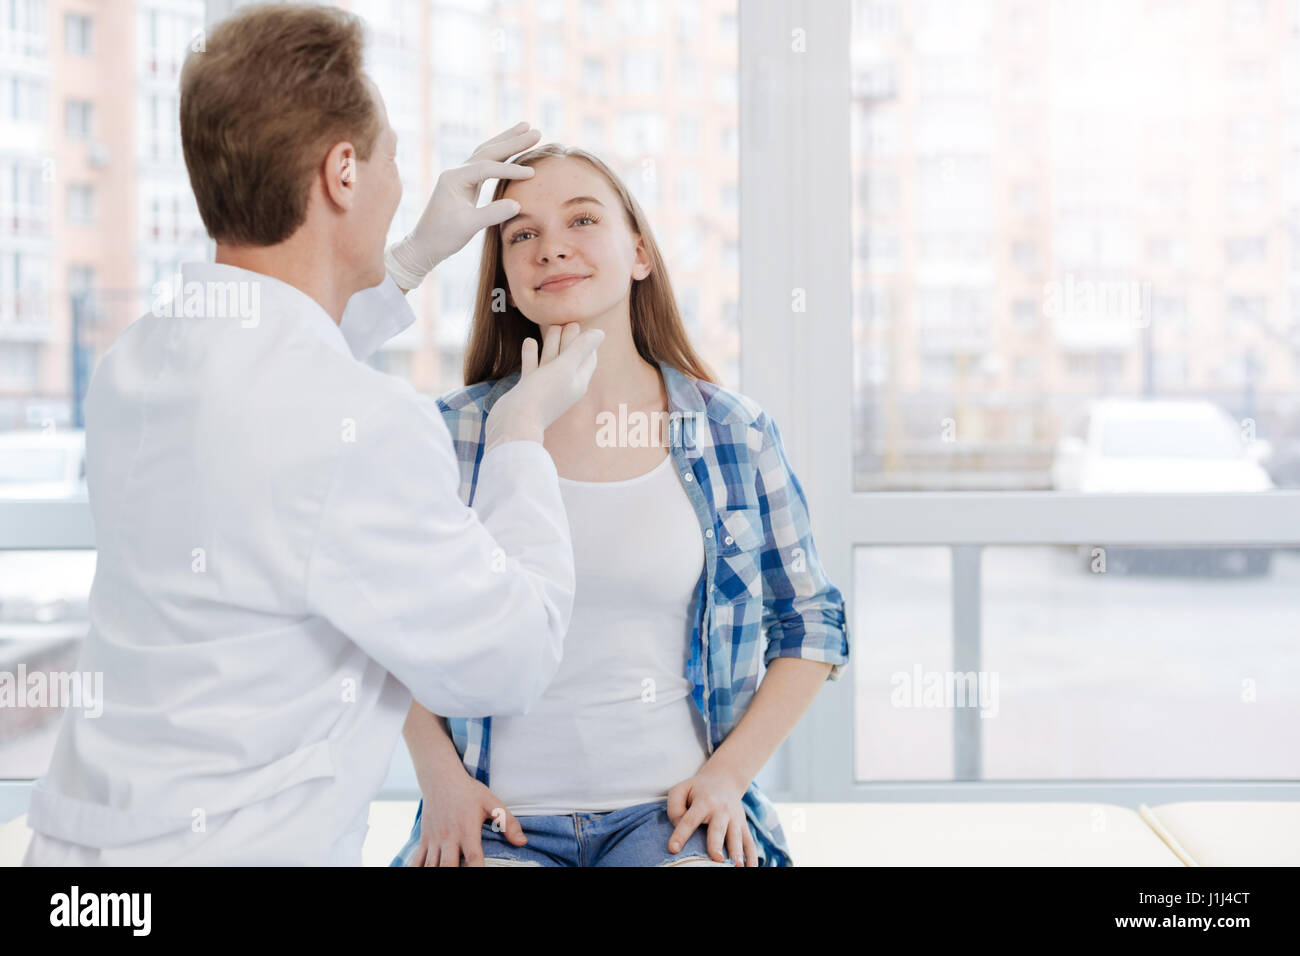 Professional dermatologist exploring patient problems in the clinic Stock Photo